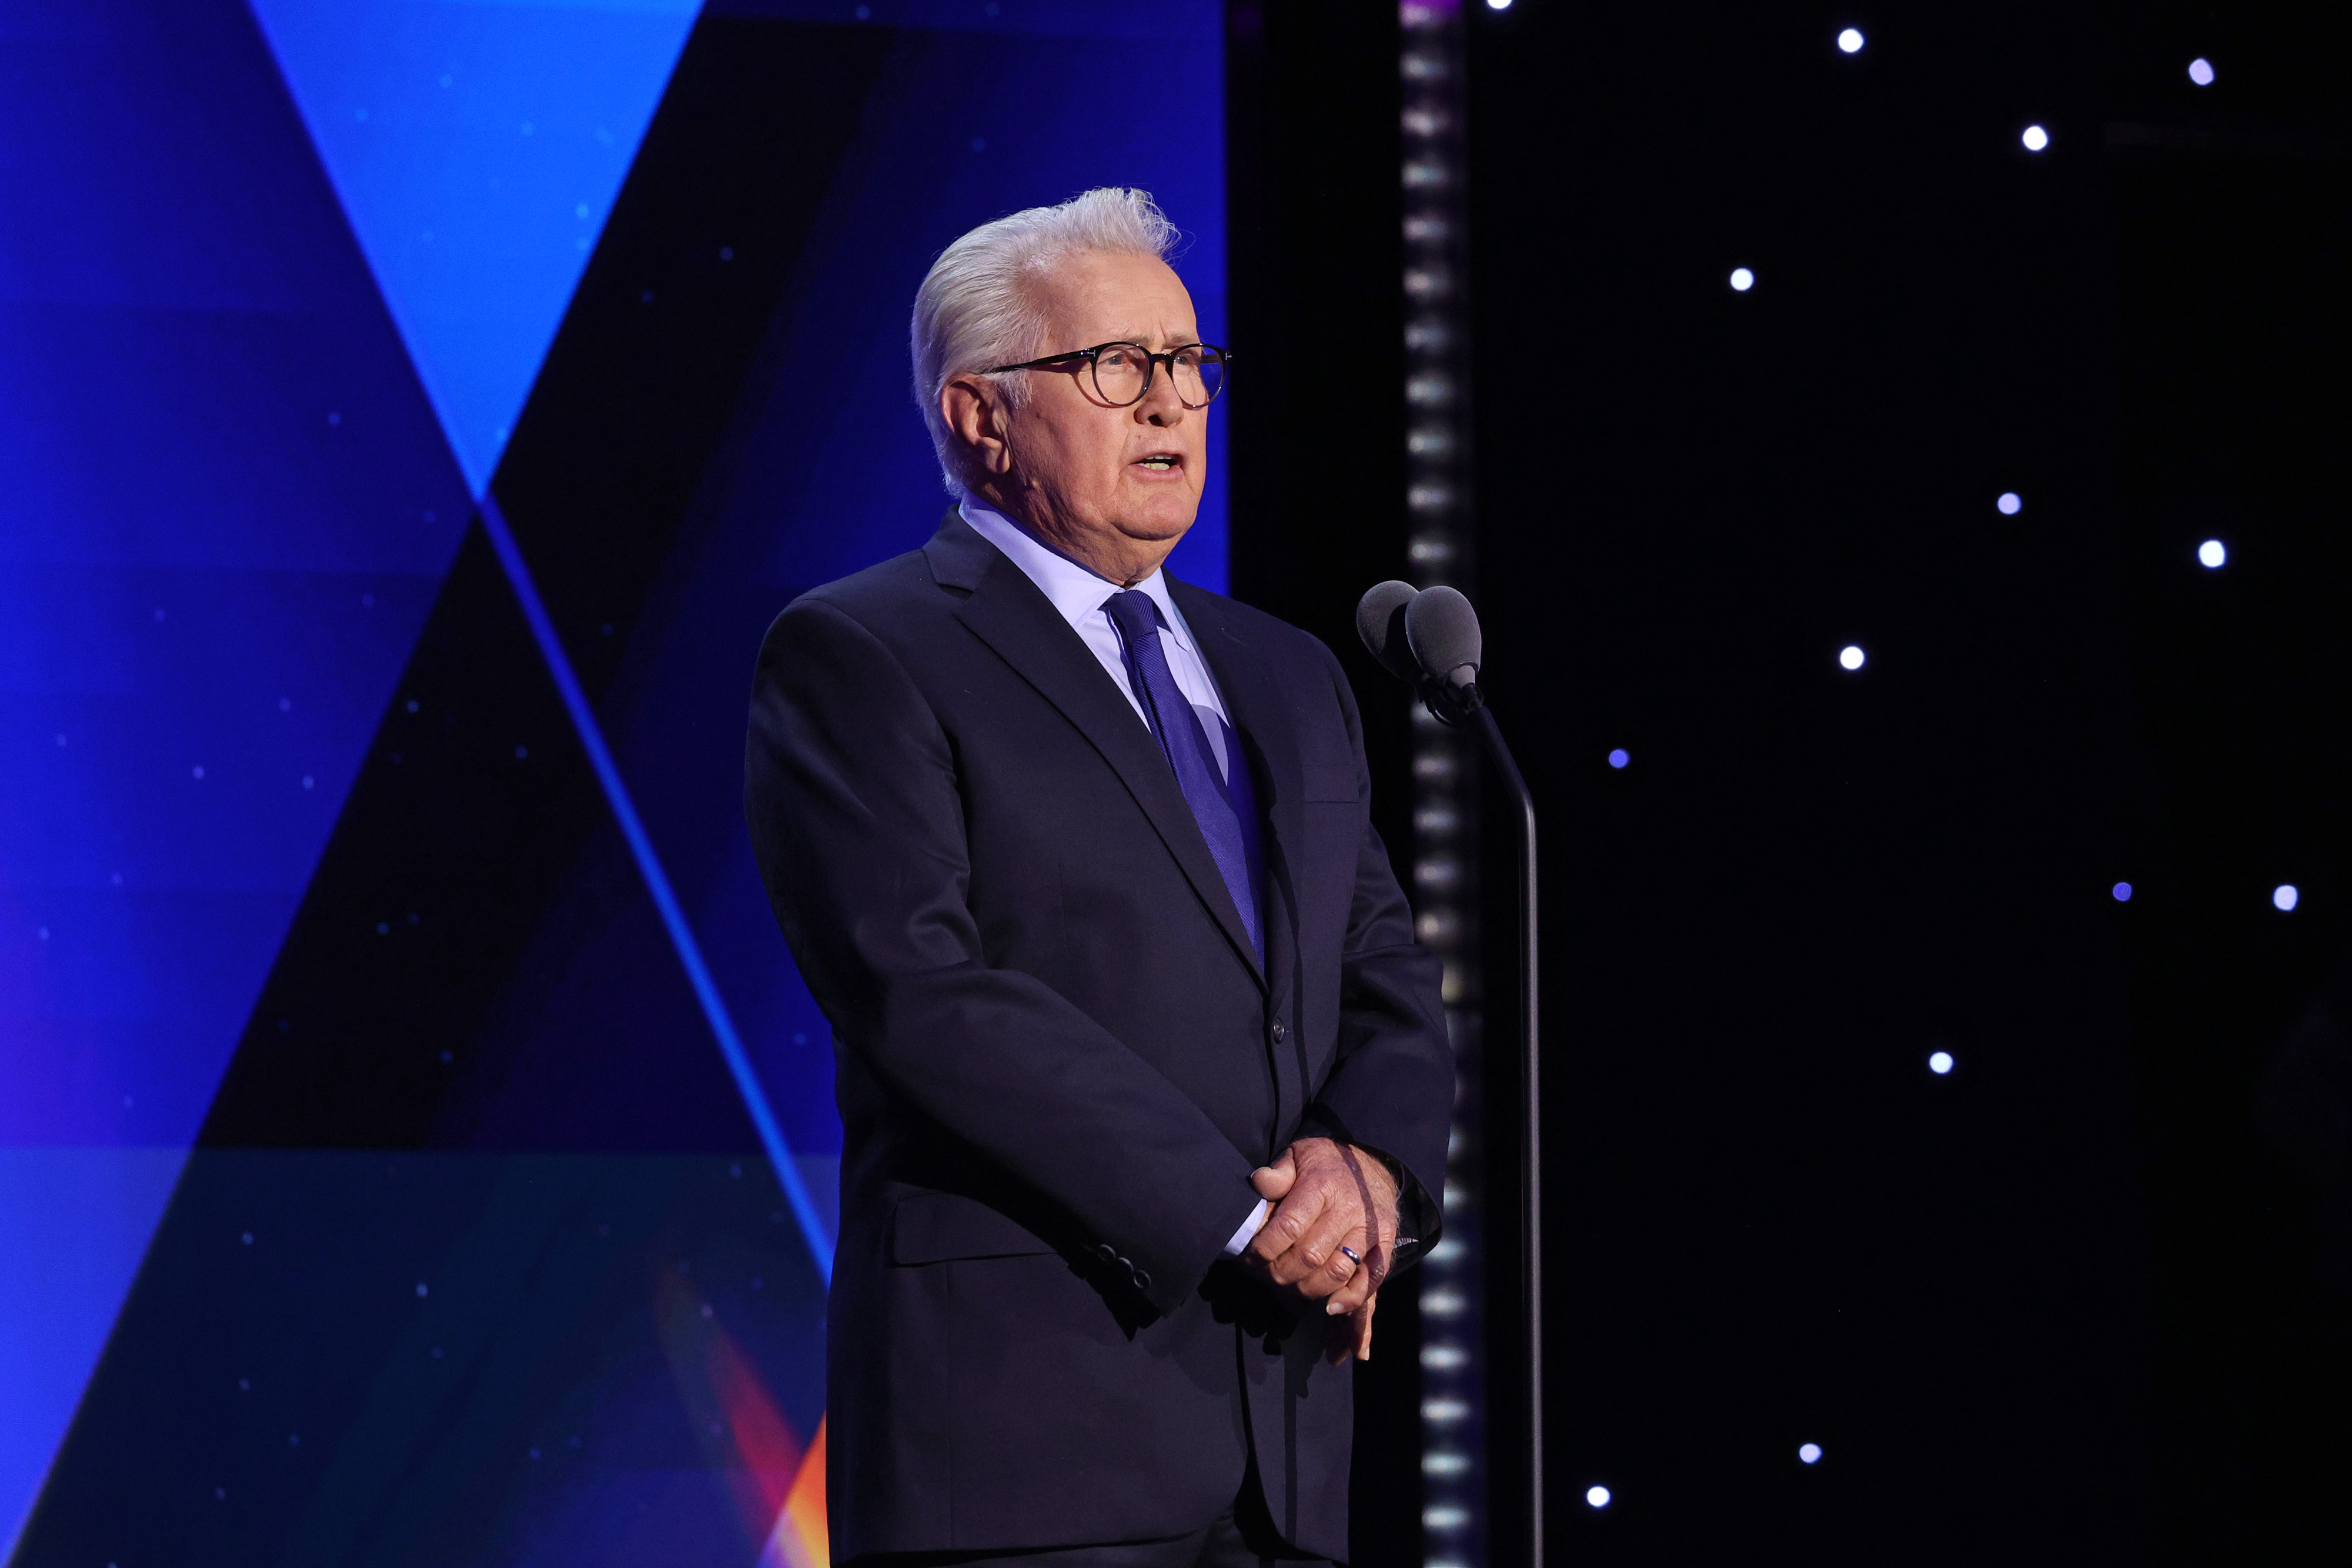 Martin Sheen speaks onstage during the 17th Annual CNN Heroes: An All-Star Tribute